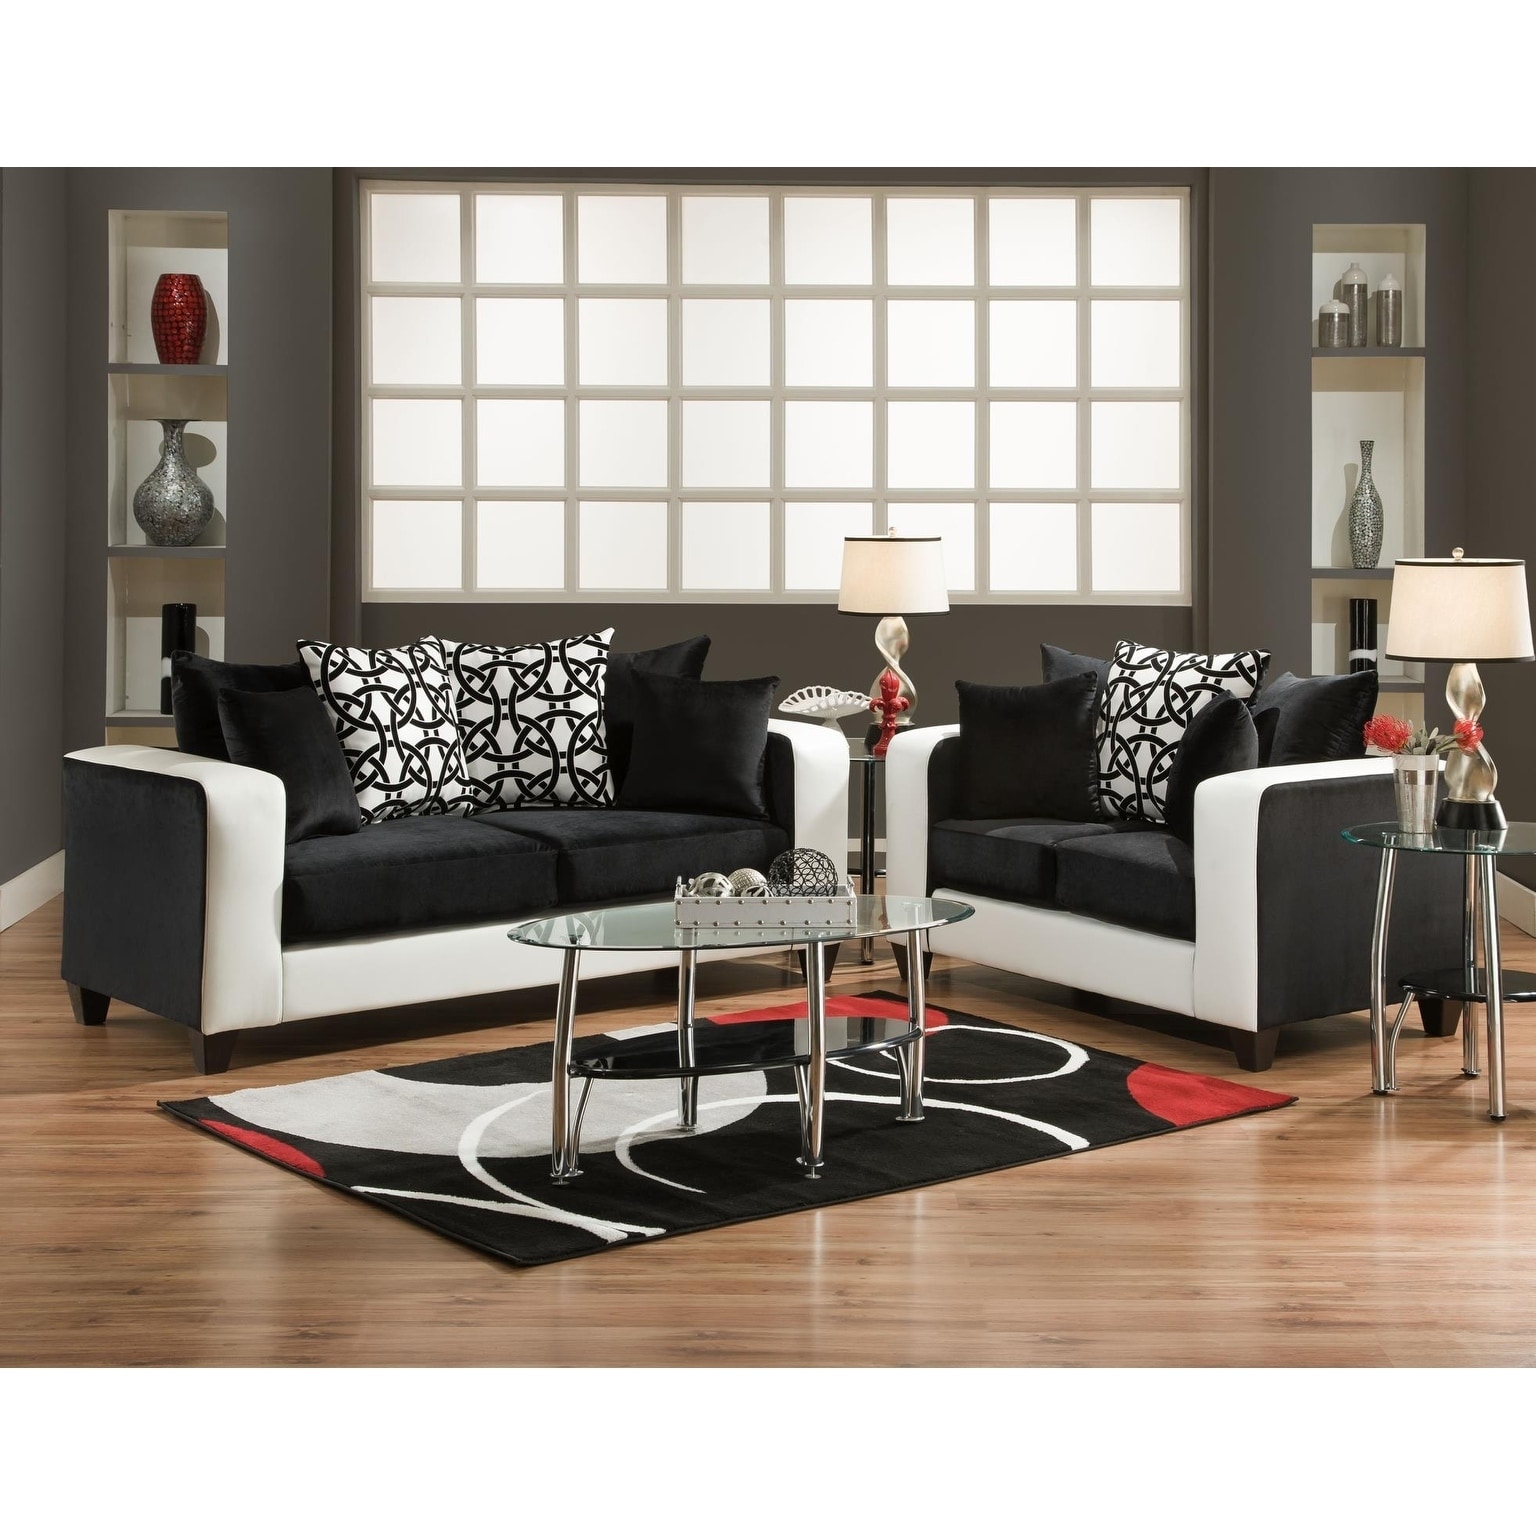 Shop Emboss Implosion Black And White Sofa Free Shipping Today